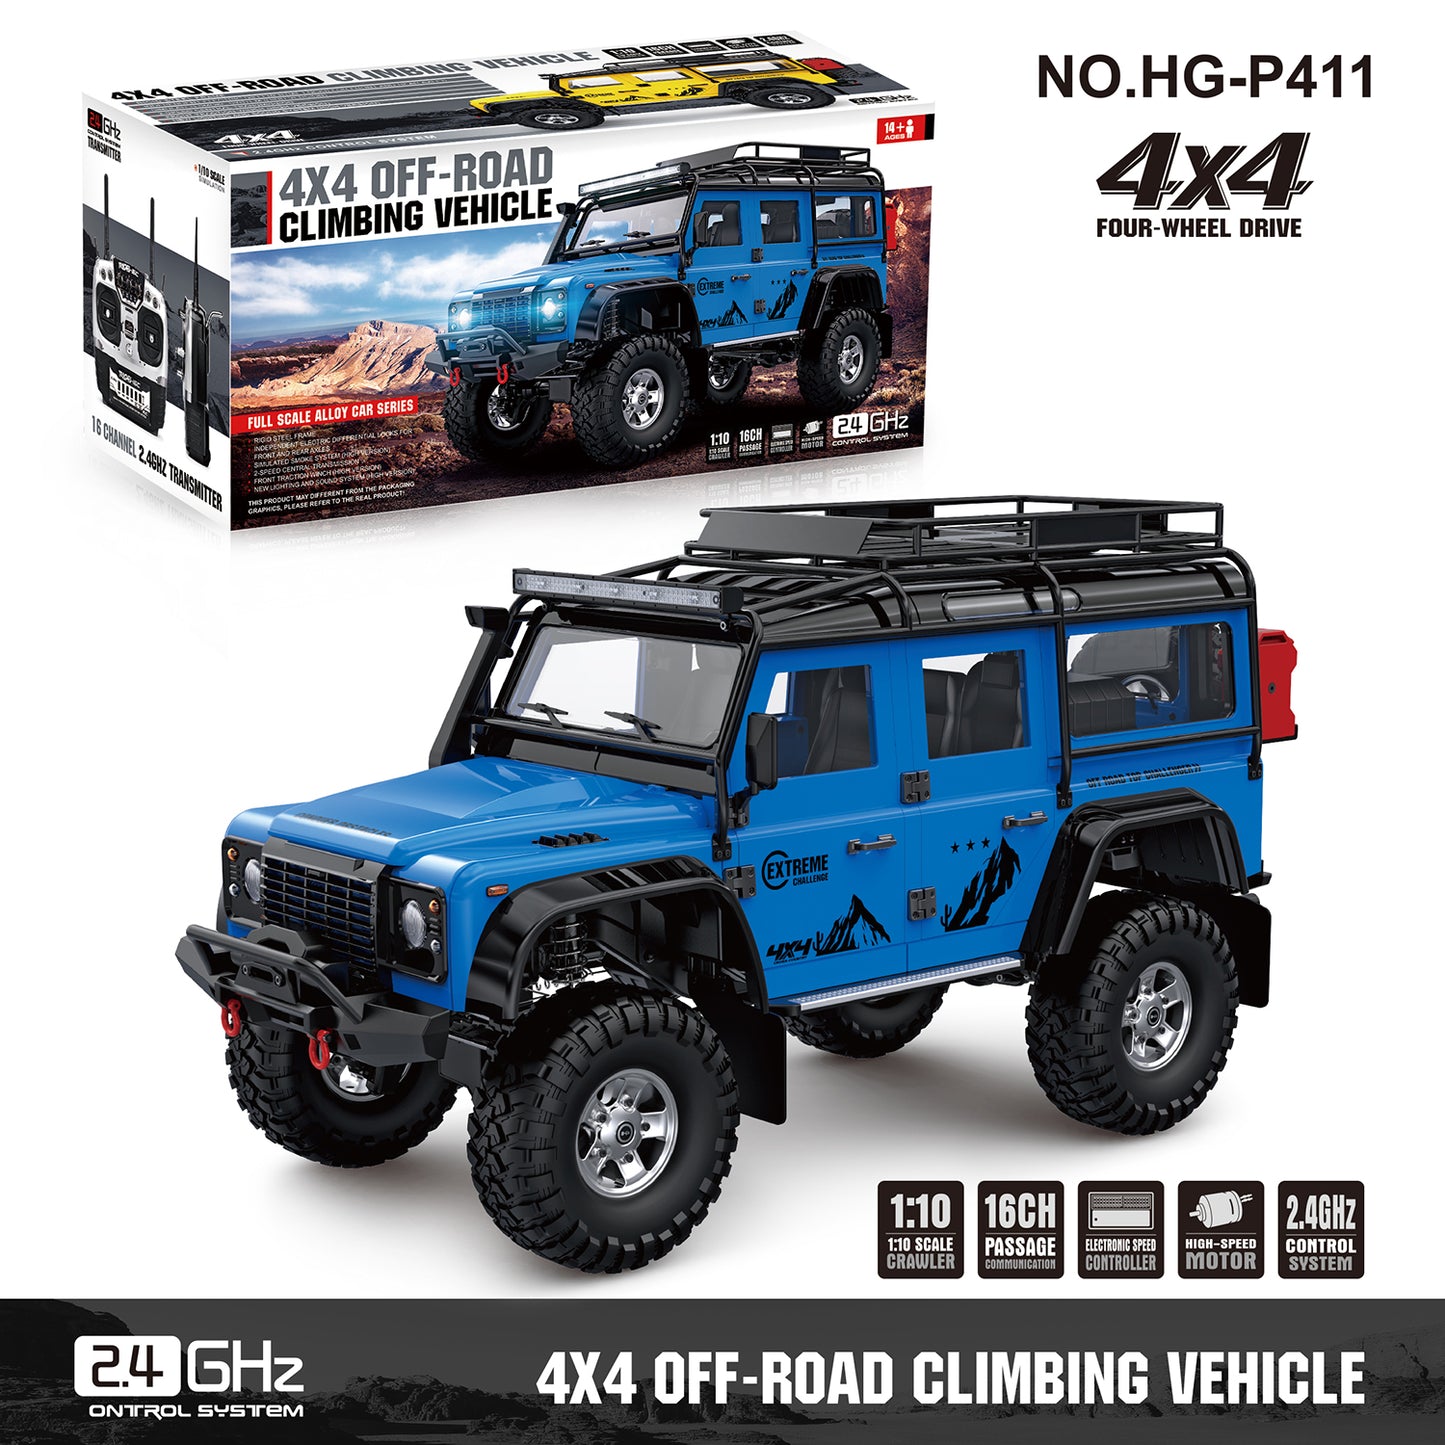 HG 1/10 RC Crawler Car 4x4 Off-road Vehicle P411 Lights Sound Radio System Smoking Motor Outdoor Remote Control Vehicle for Man